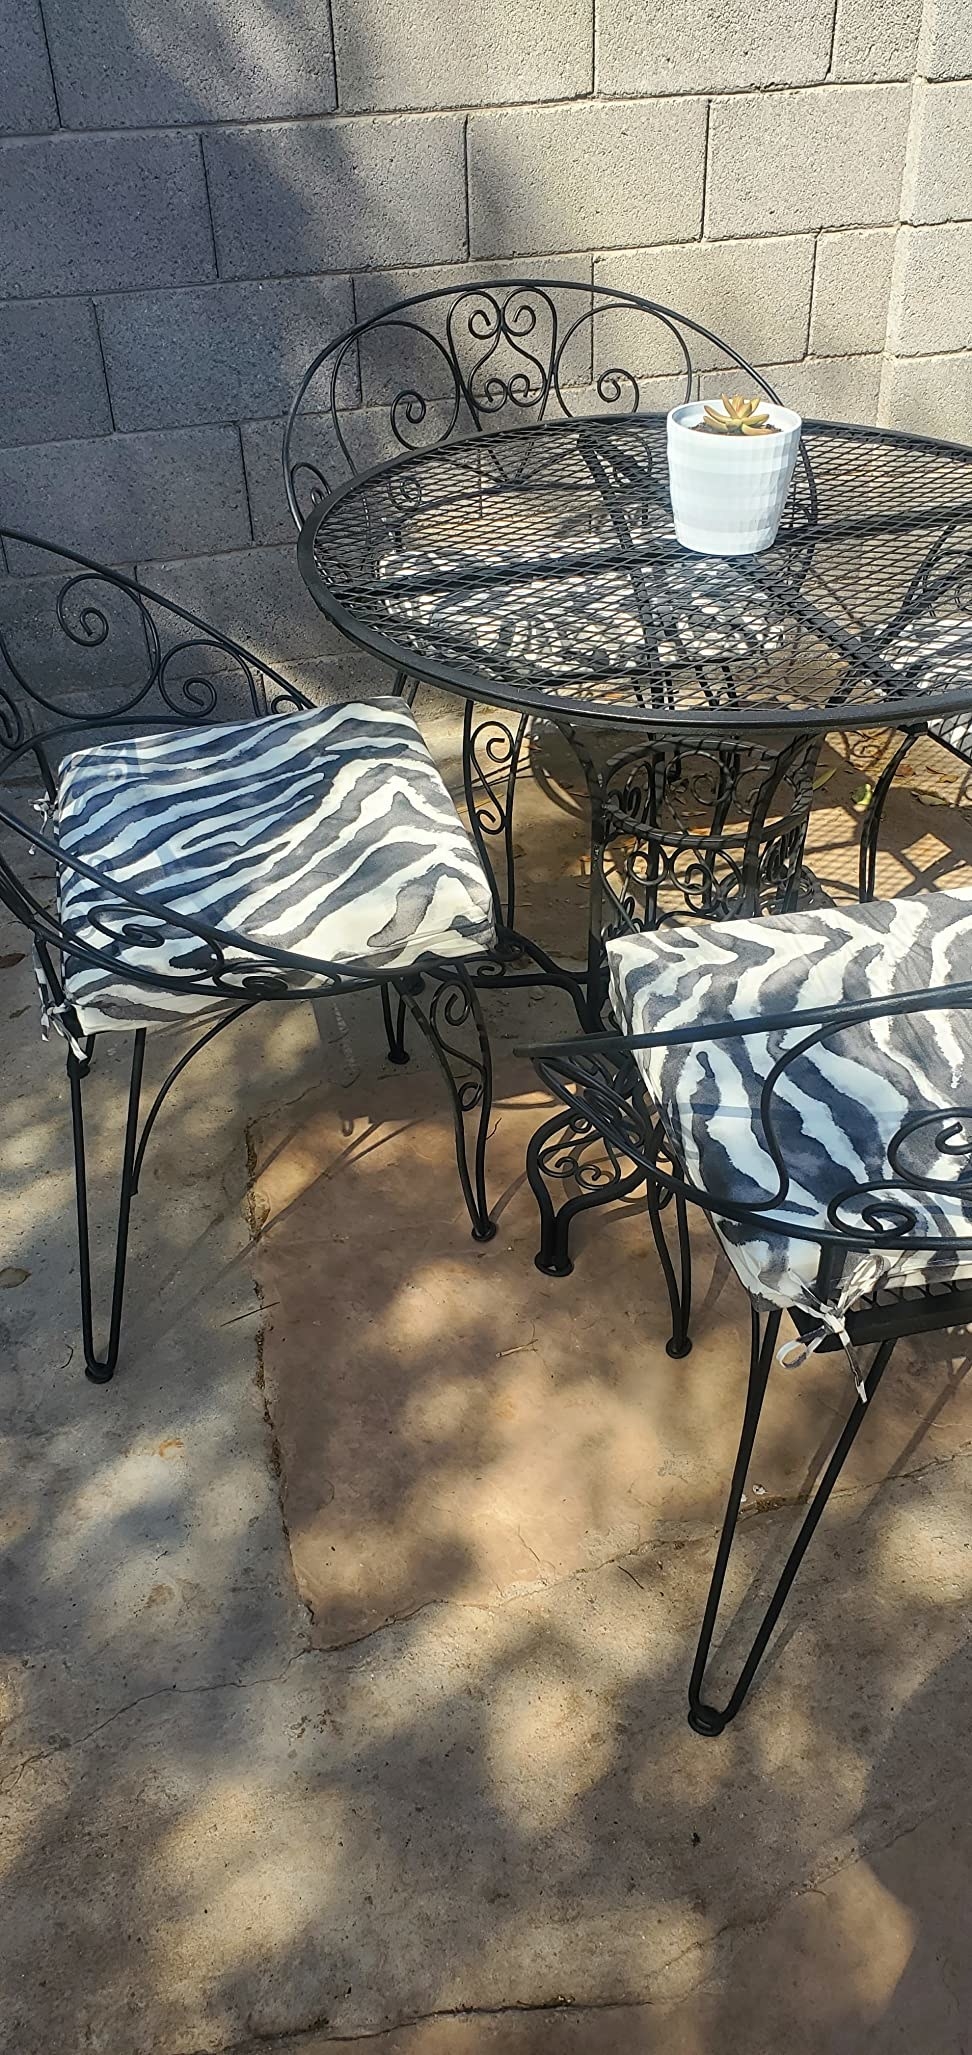 The cushions on patio chairs